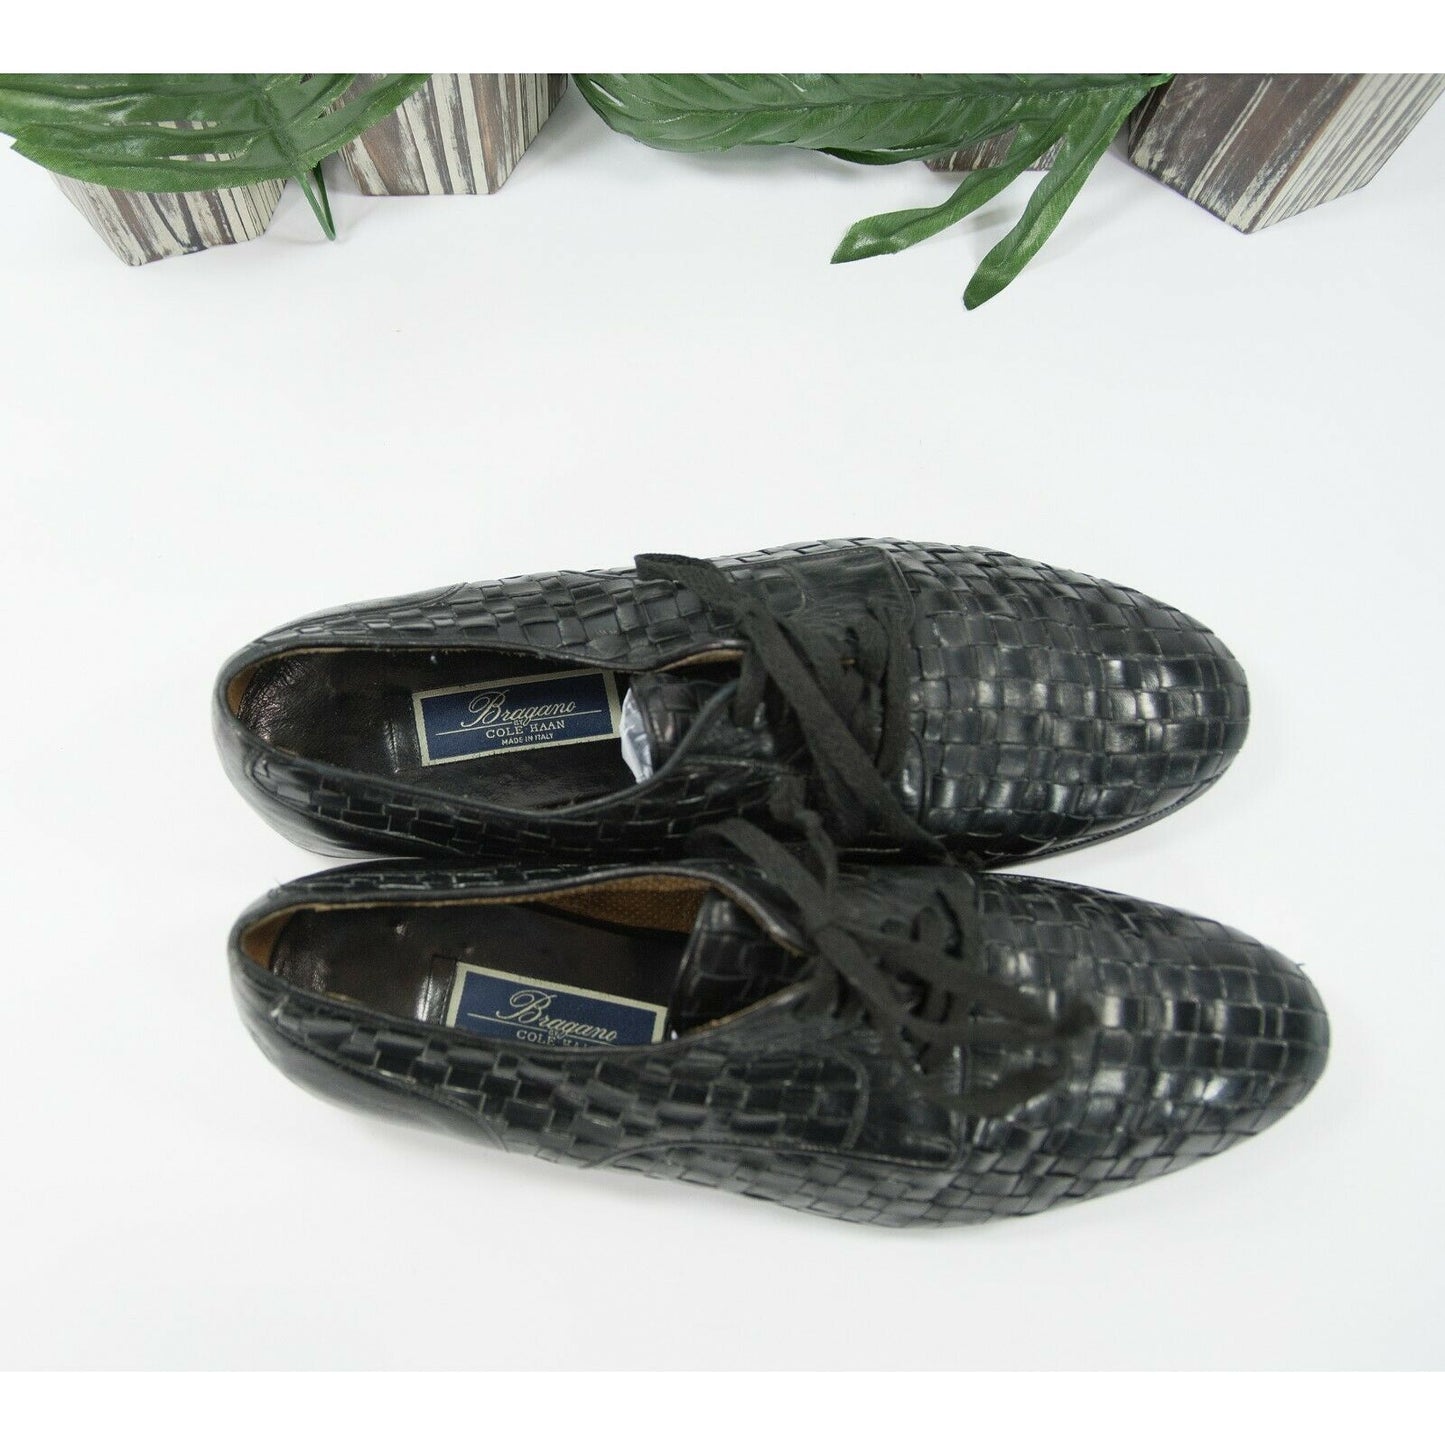 Cole Haan Black Woven Leather Lace Up Oxford Loafer Shoes Size 13